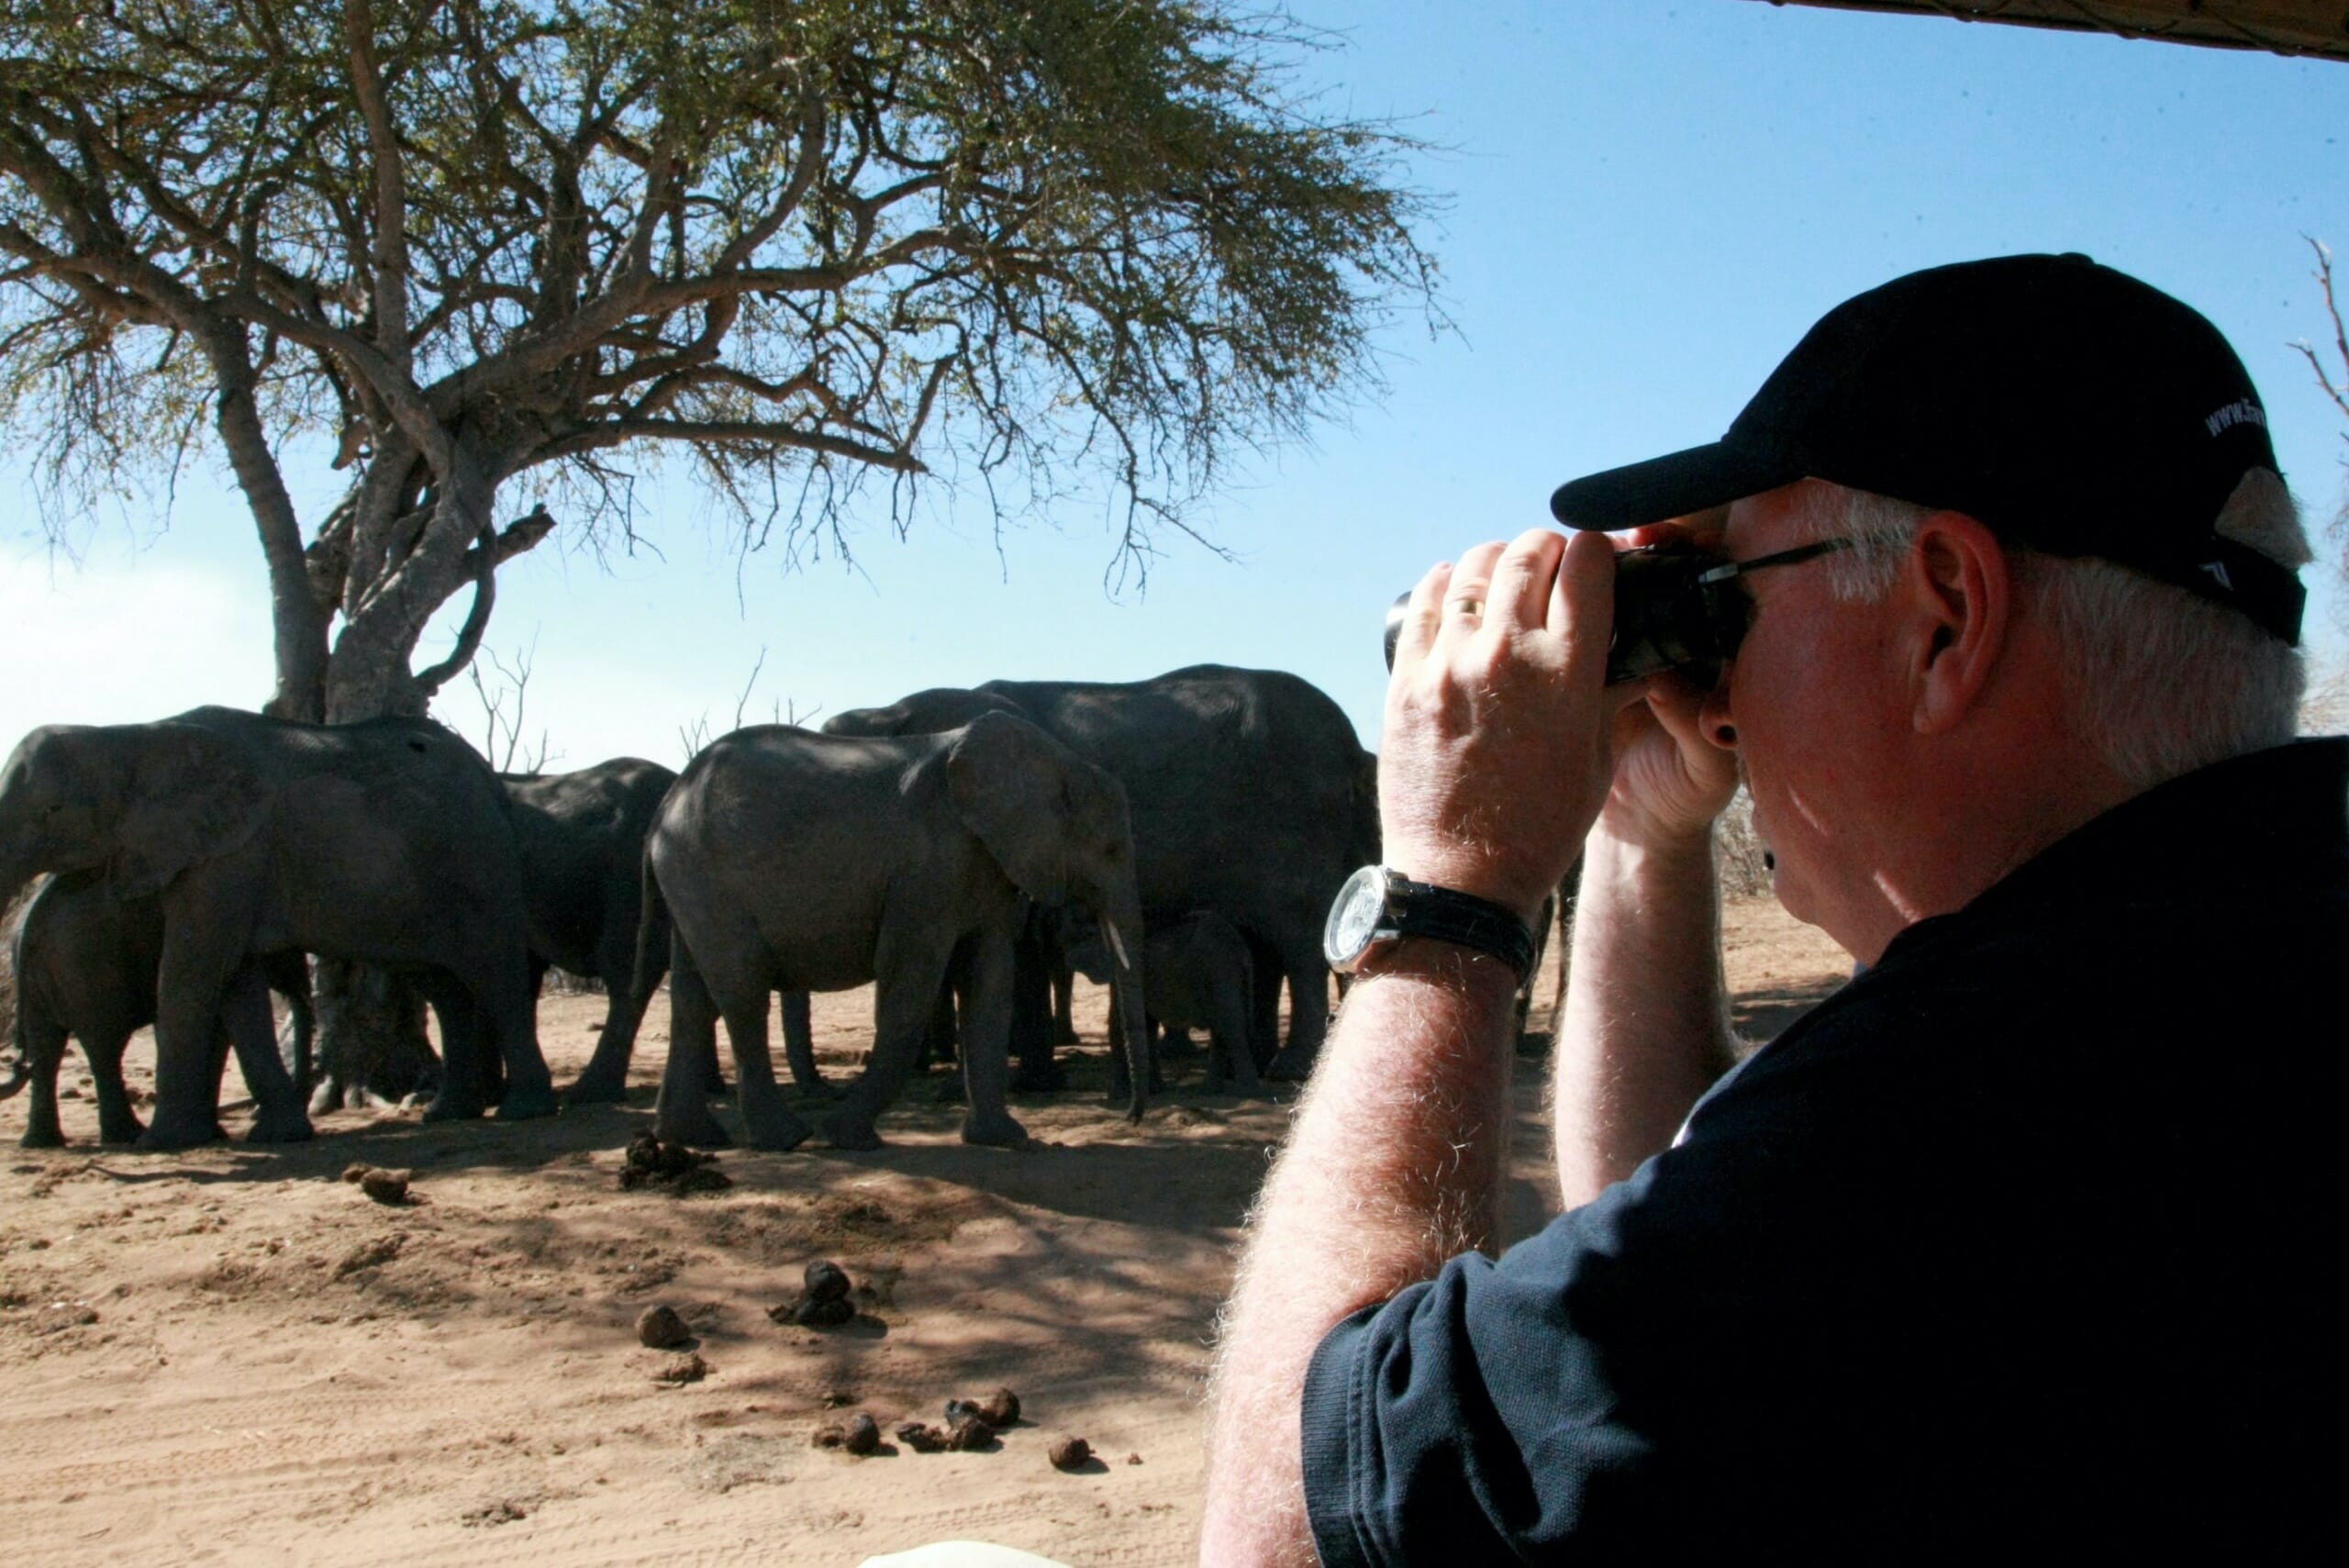 Azzedine Downes observing elephants in the wild as part of conservation efforts